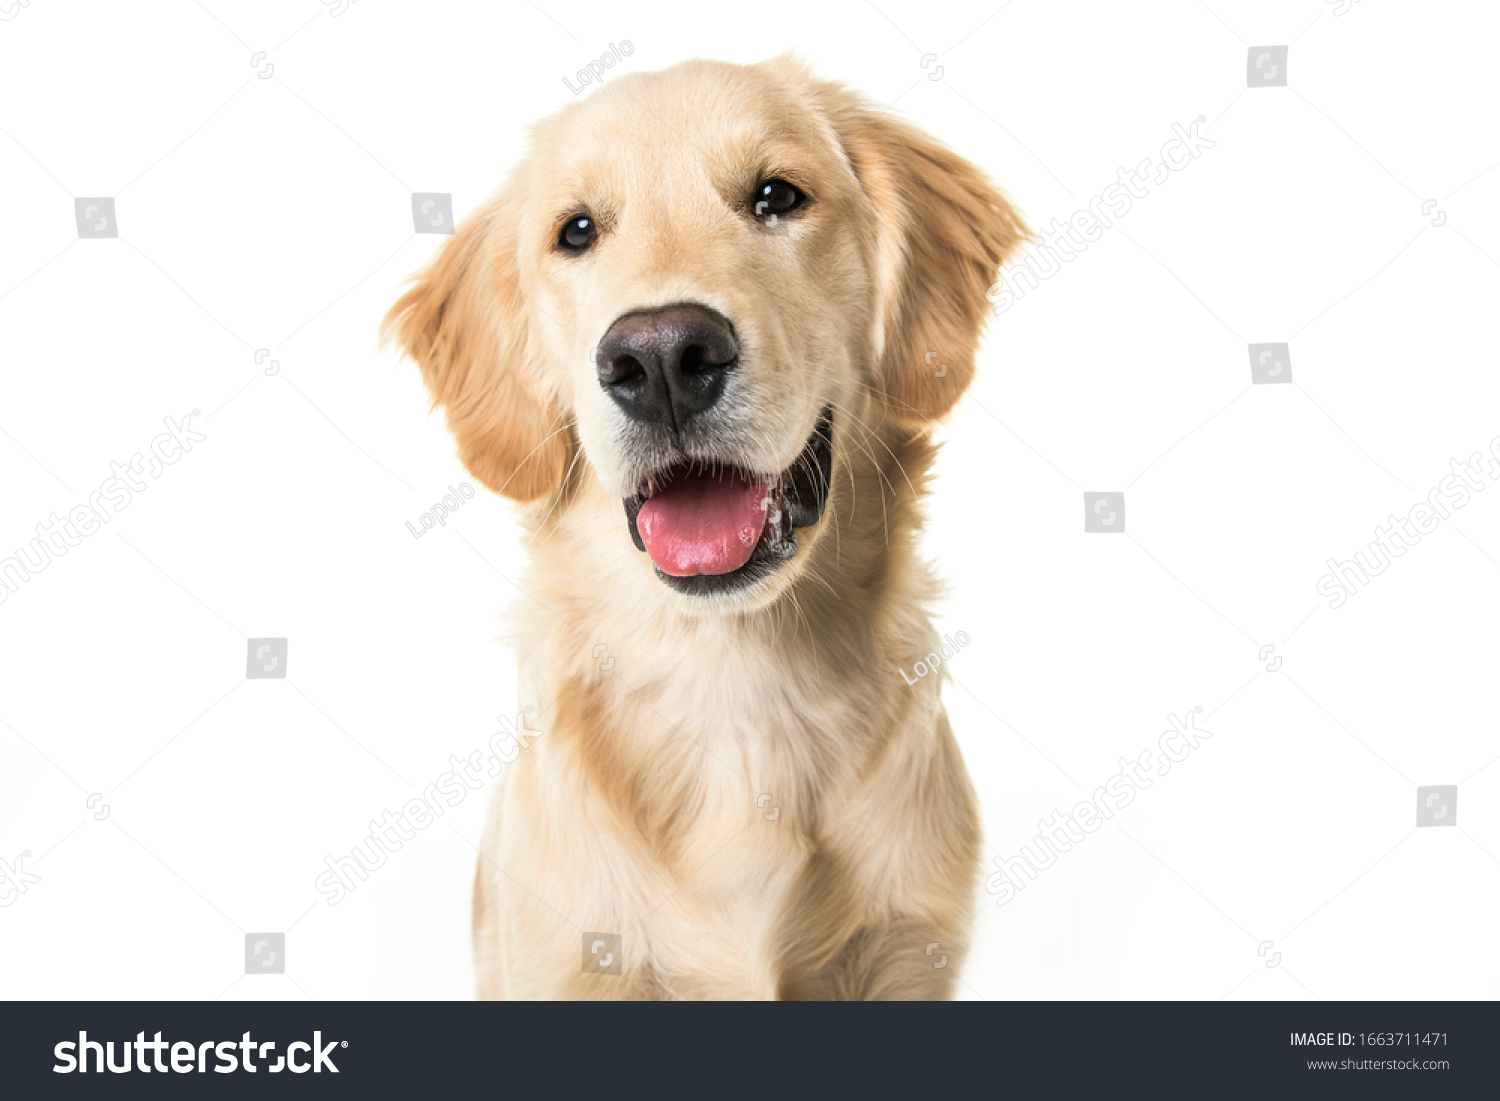 A young Golden Retriever Portrait isolated on white #1663711471